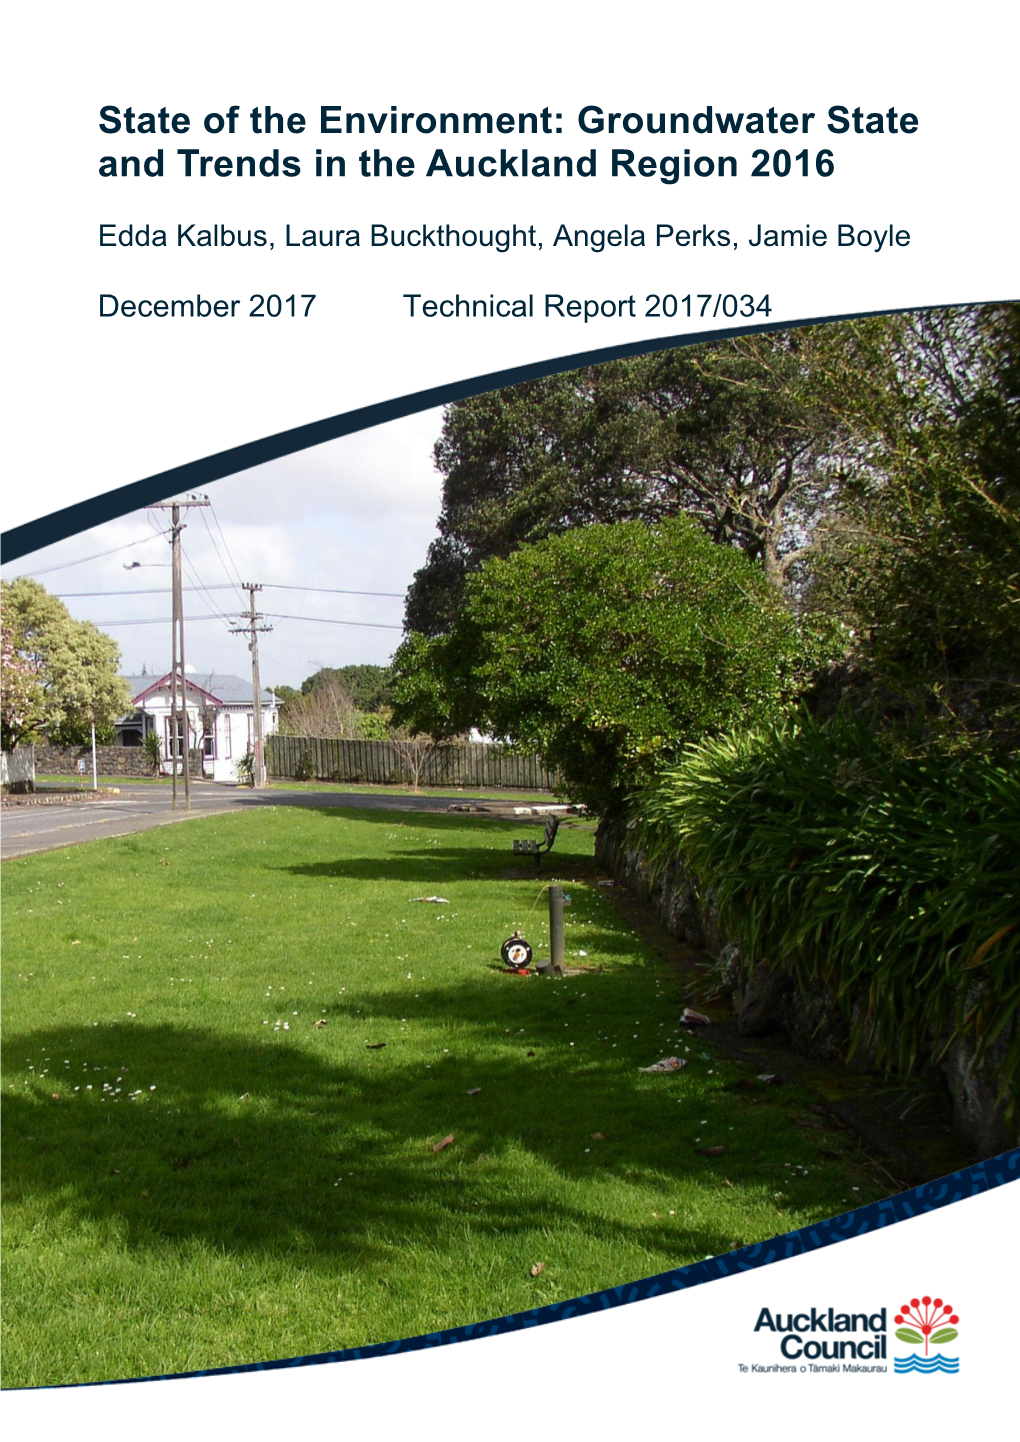 Groundwater State and Trends in the Auckland Region 2016